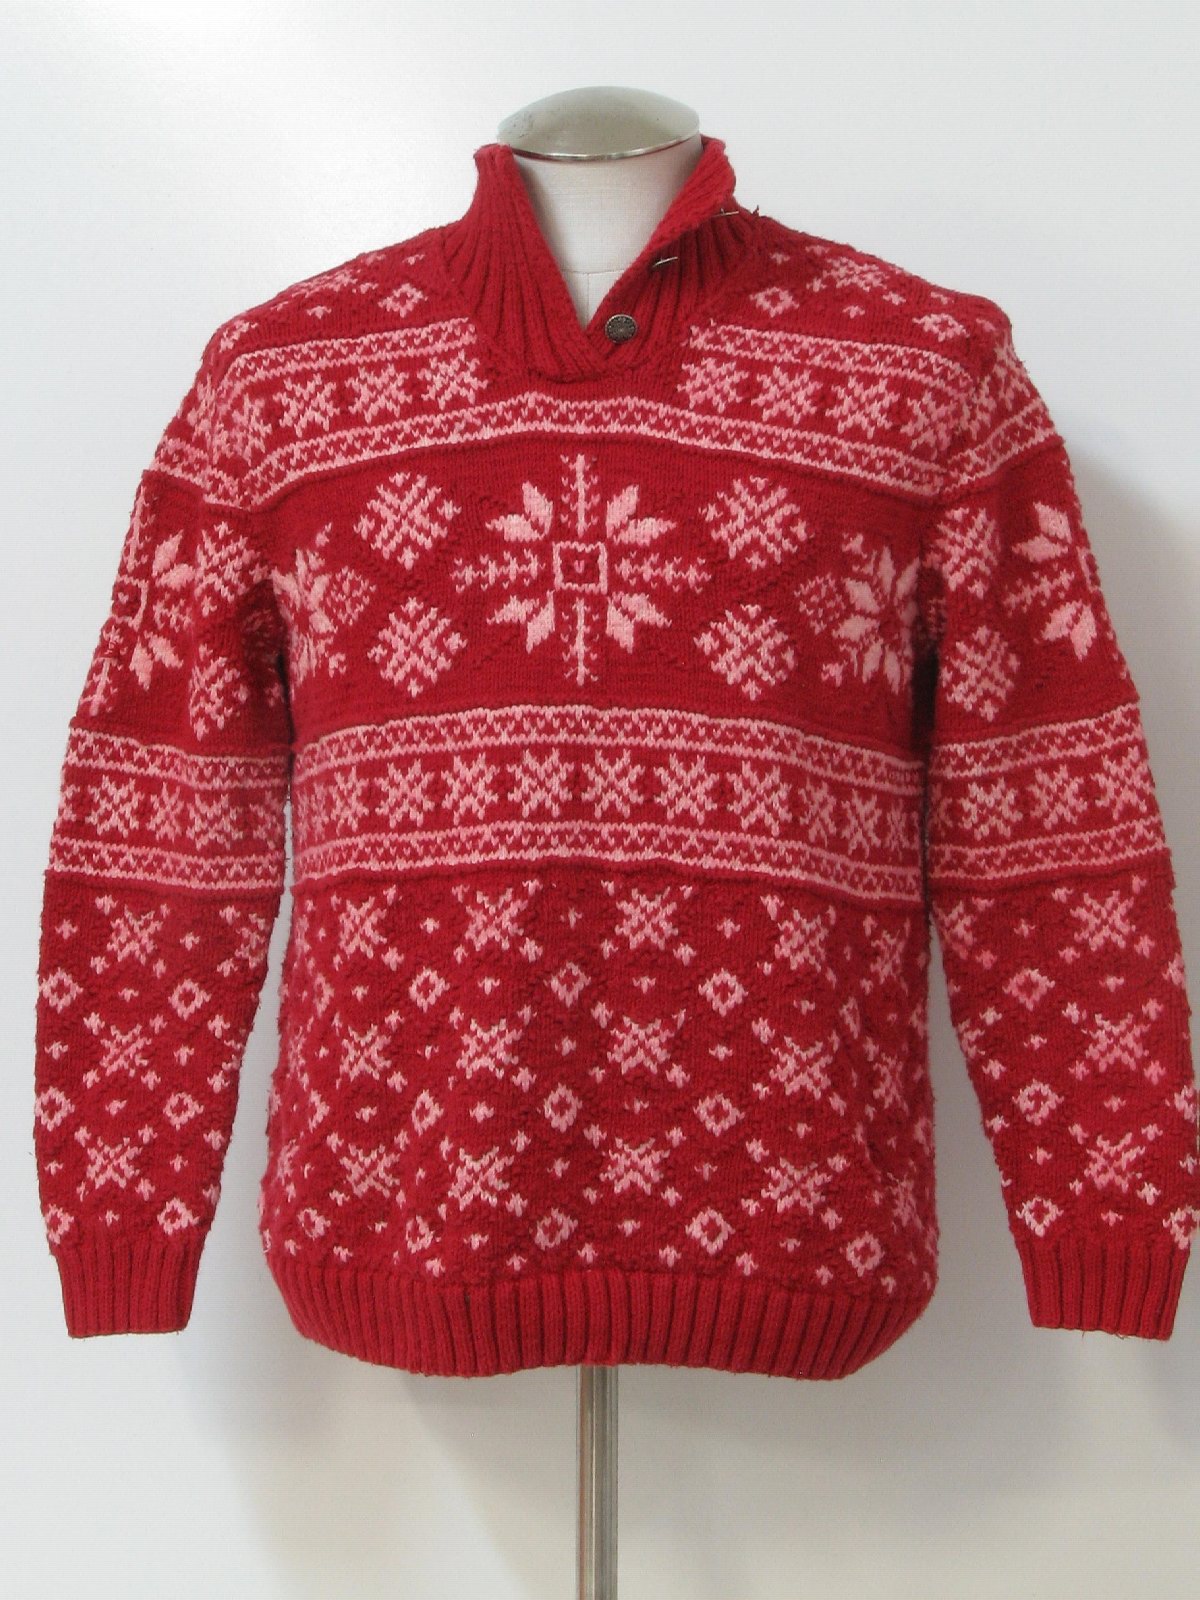 Ugly Christmas Sweater: -Ralph Lauren- Unisex Red background cotton  pullover longsleeve ugly Christmas sweater, fold over collar with Fair Isle  style snowflake pattern. Pattern continues on back. Color bleeding  throughout sweater. (made